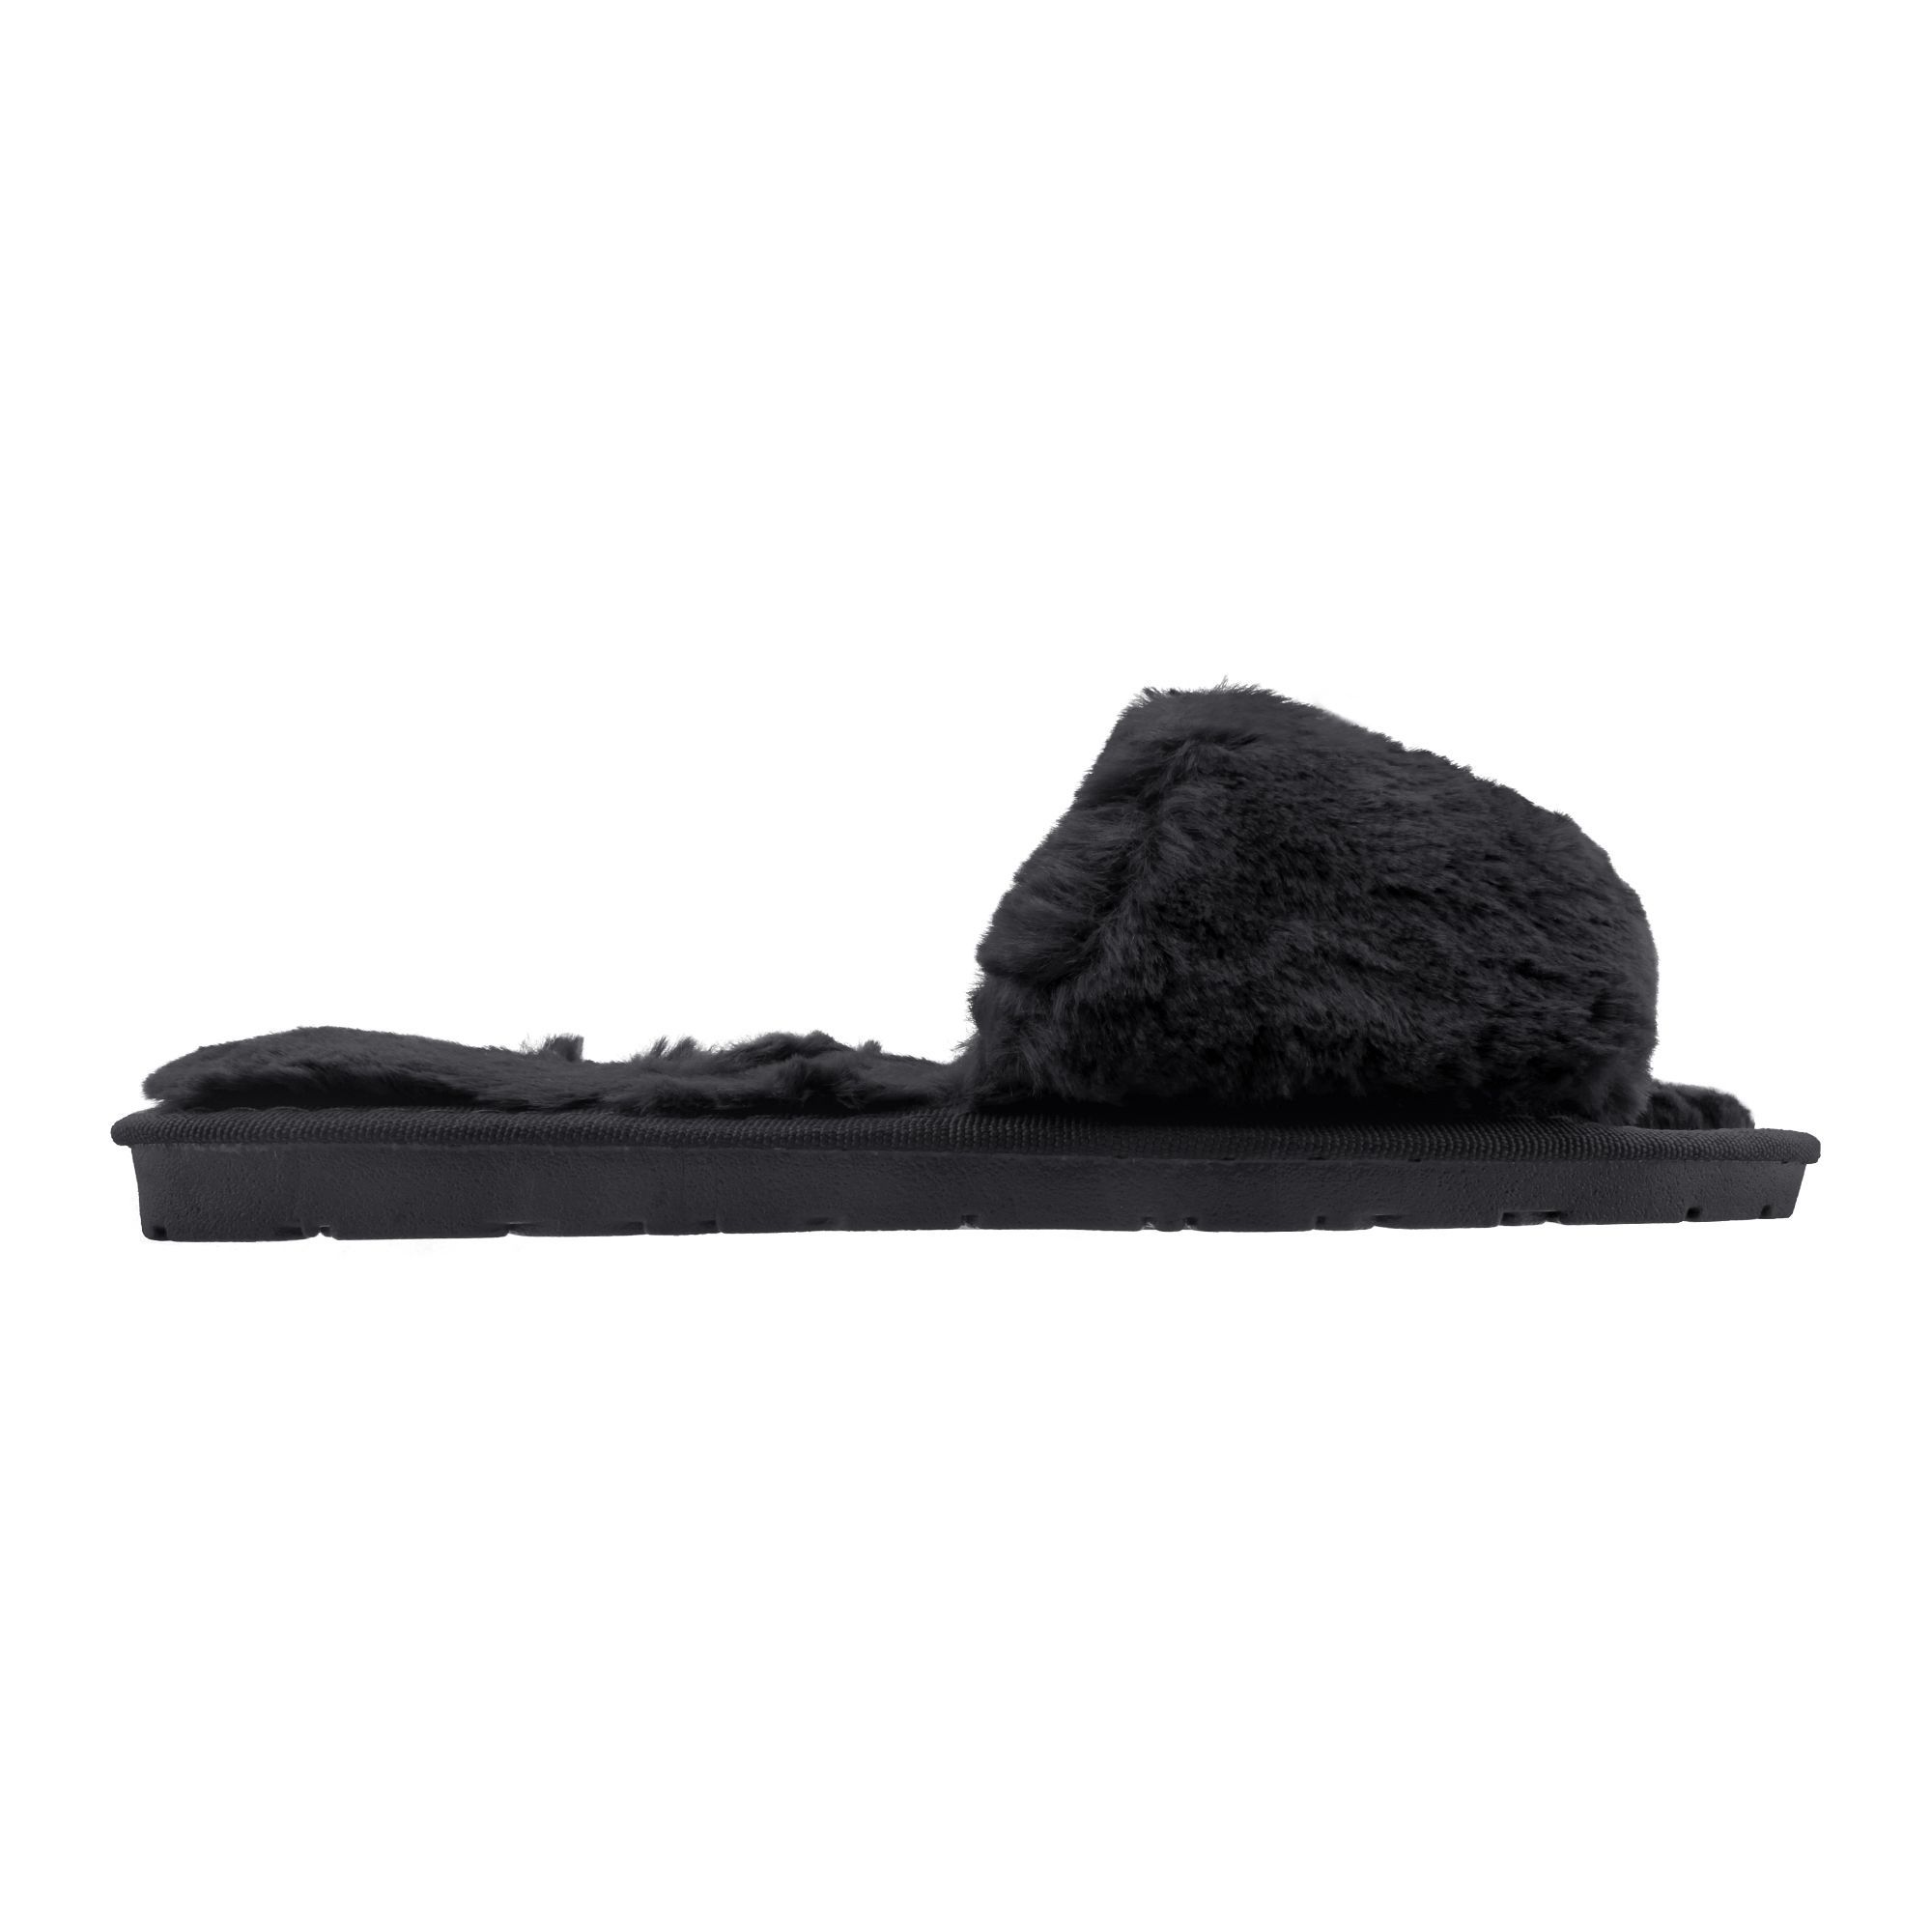 Purchase Gucci Style Women's Bedroom Slippers, Black, 1219 Online at ...